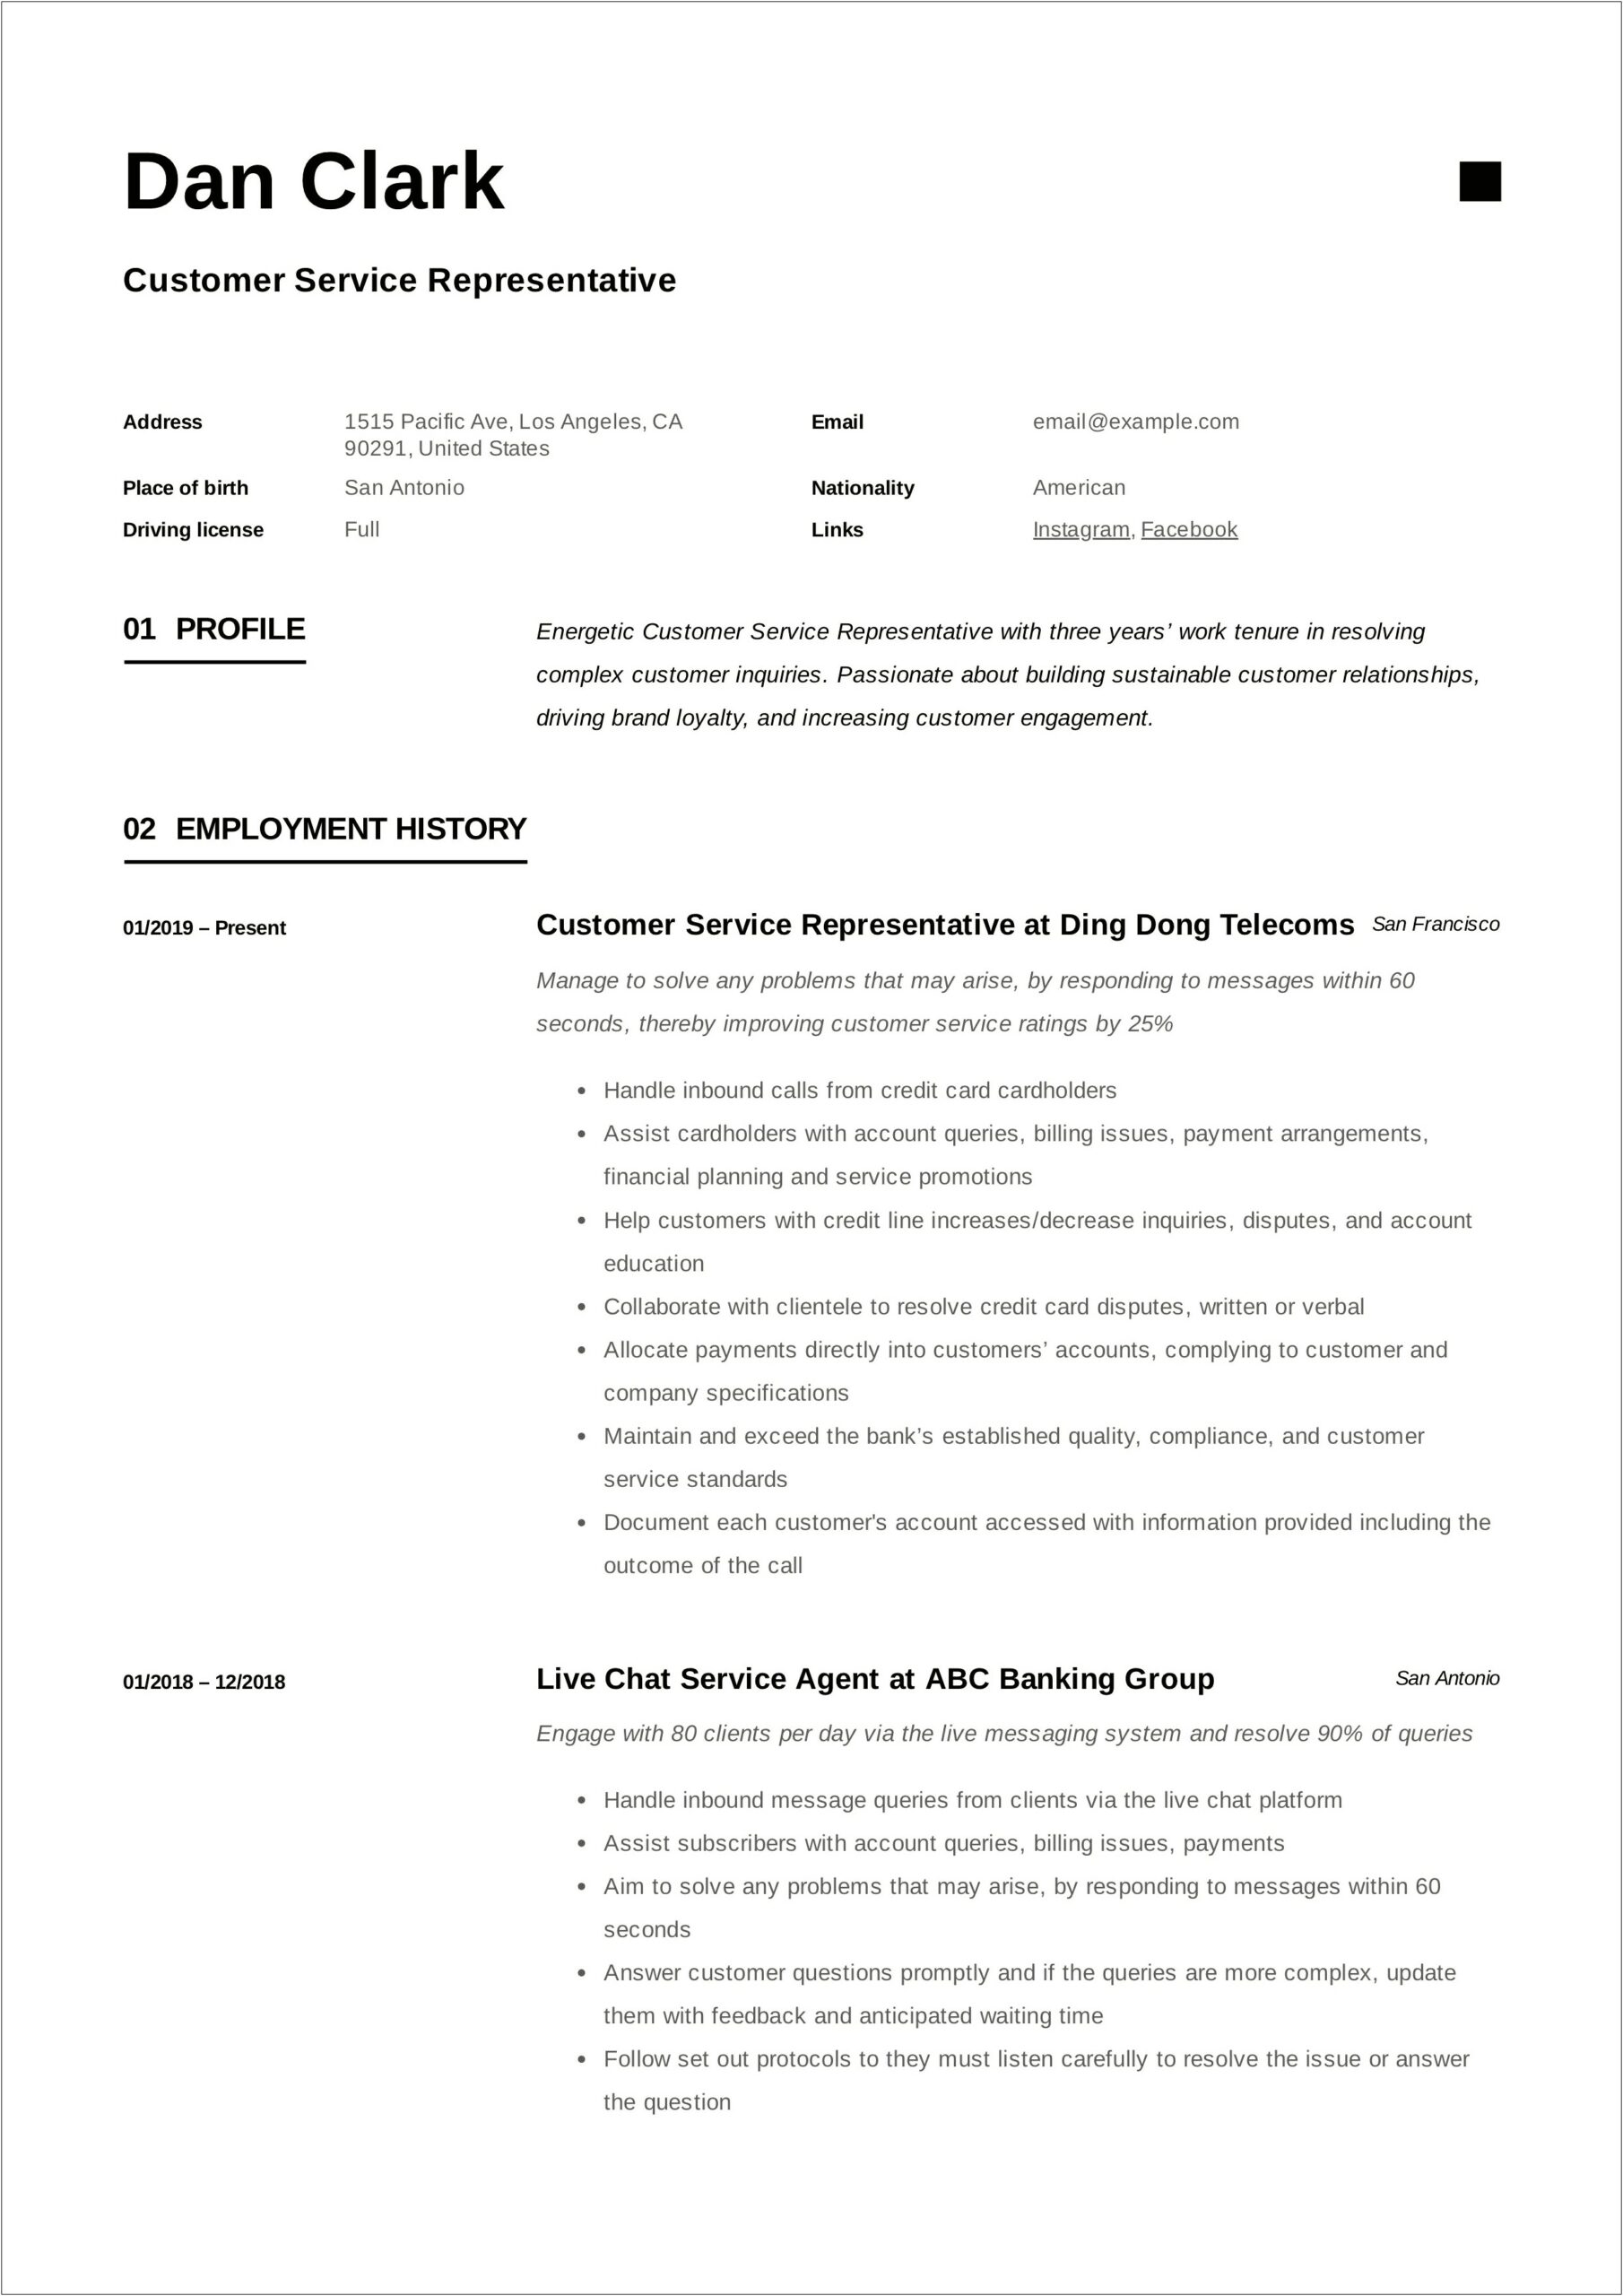 Example Resume Profiles For Customer Service